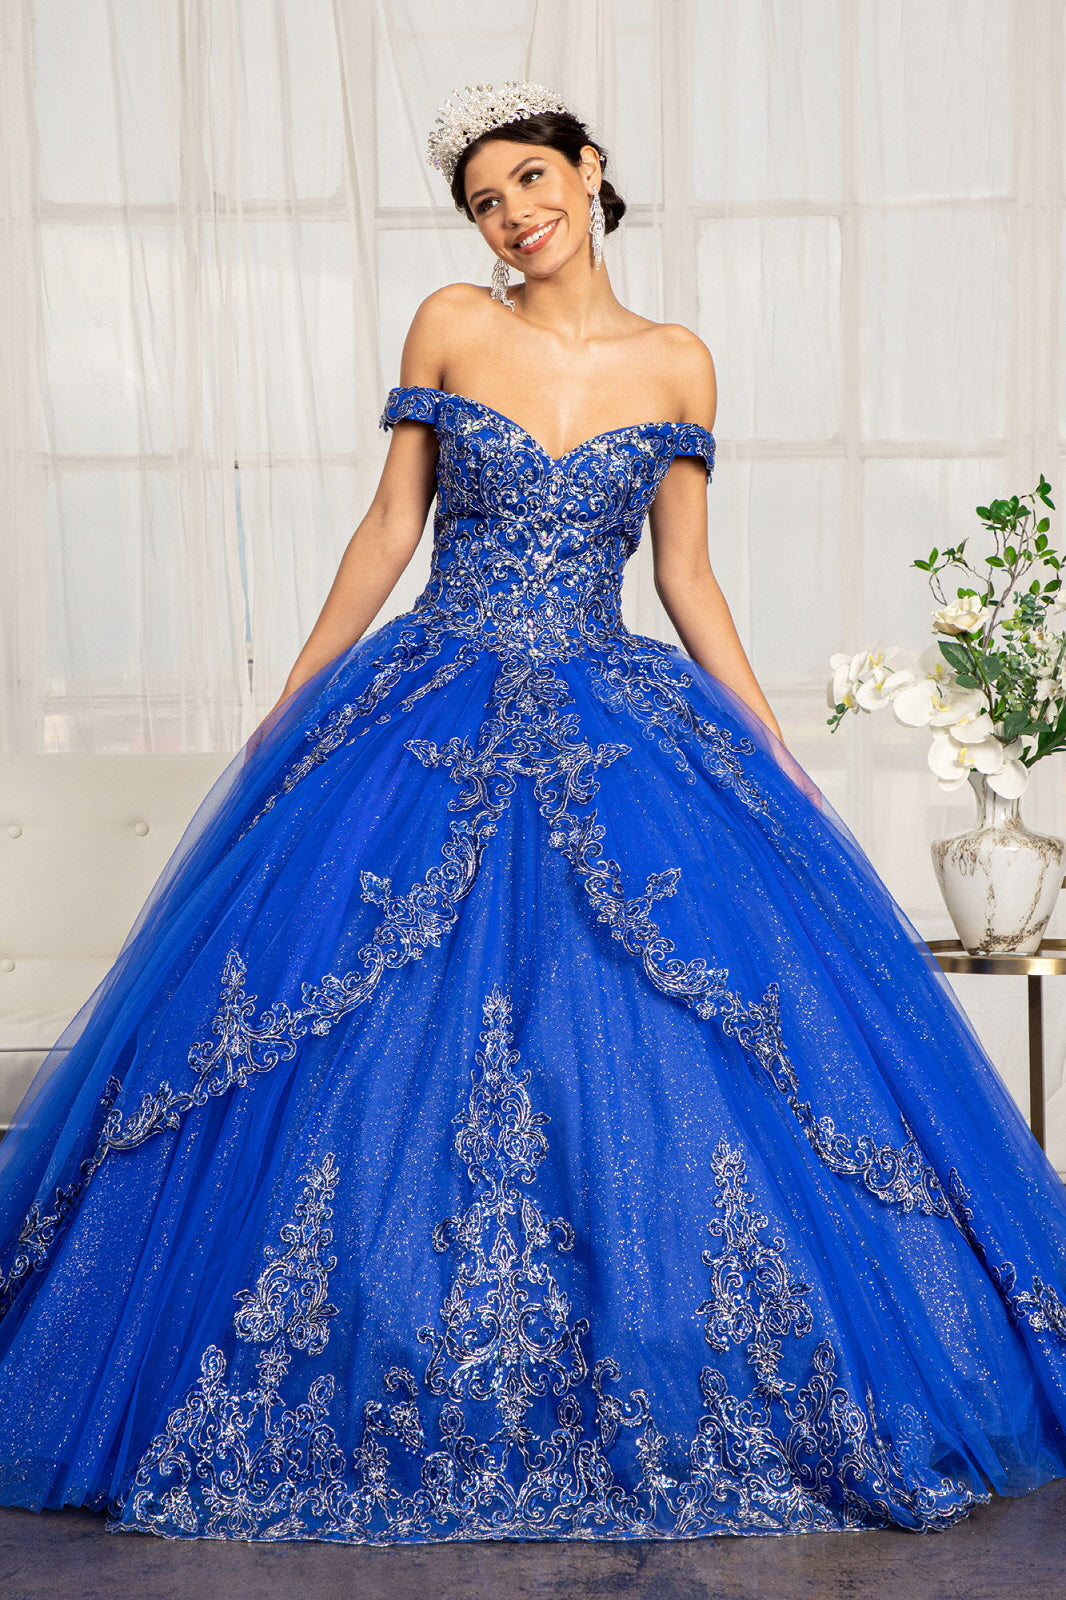 Embroider Embellished Sweetheart Glitter Mesh Quinceanera Dress GLGL1972 Elsy Style QUINCEANERA